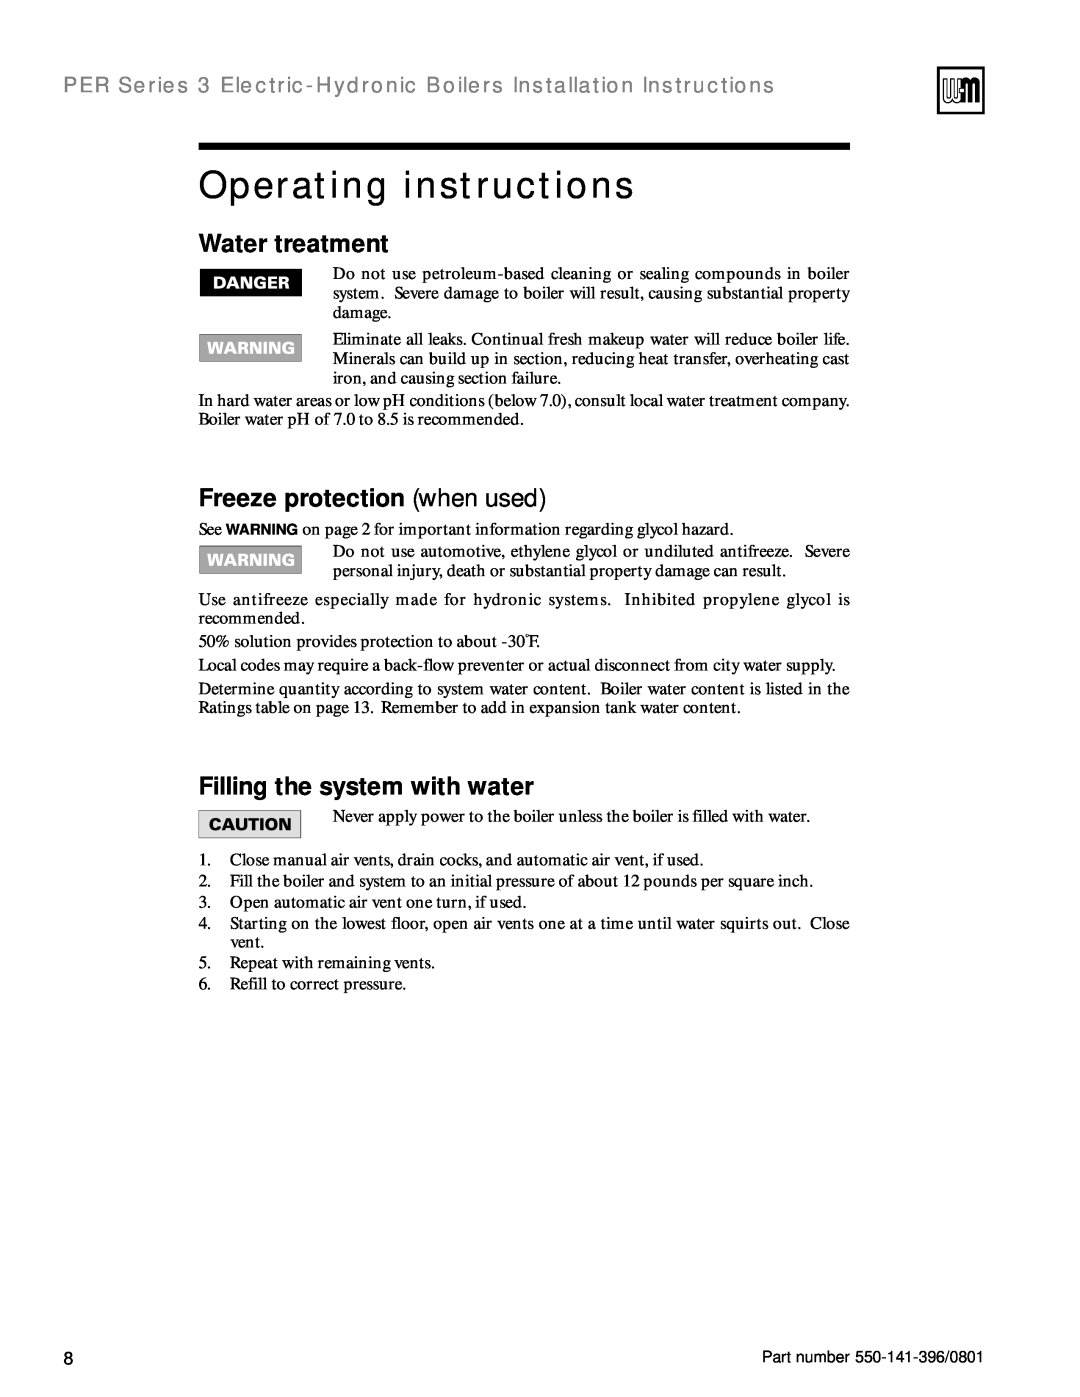 Weil-McLain 550-141-396/0801 installation instructions Operating instructions, Water treatment, Freeze protection when used 